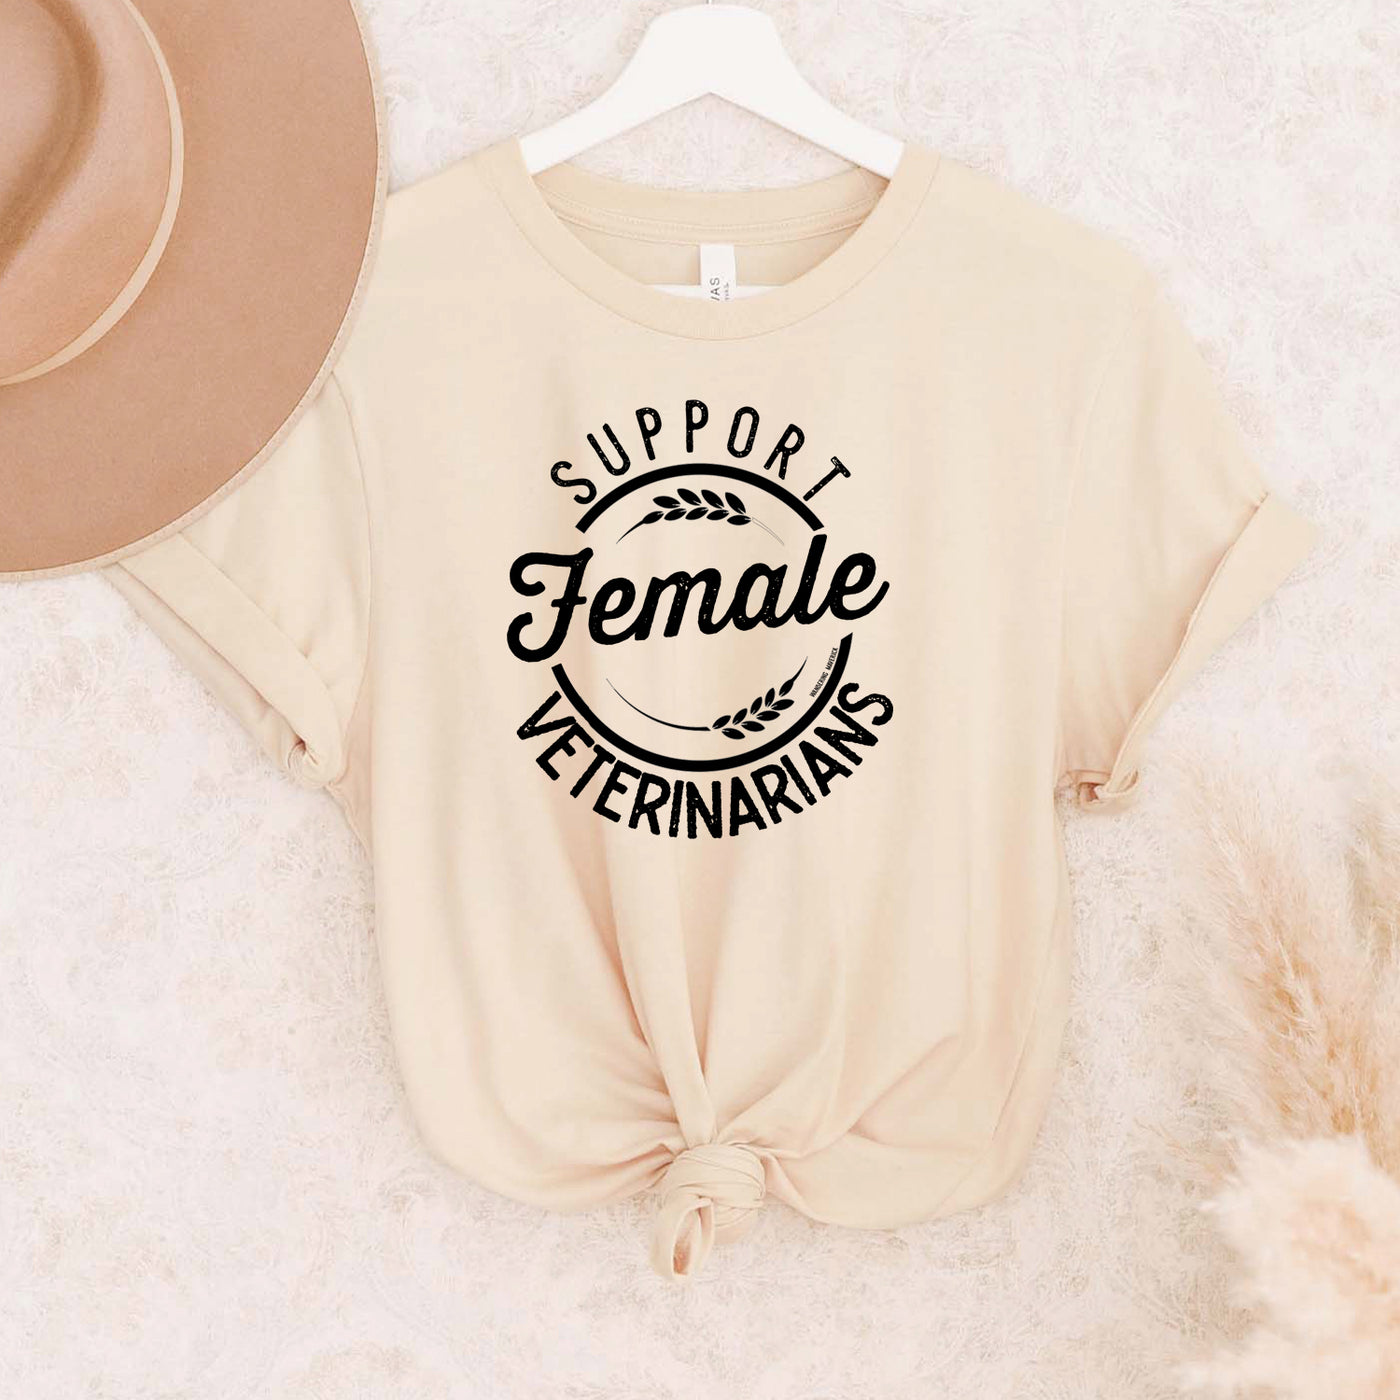 Support Female Veterinarians T-Shirt (XS-4XL) - Multiple Colors!